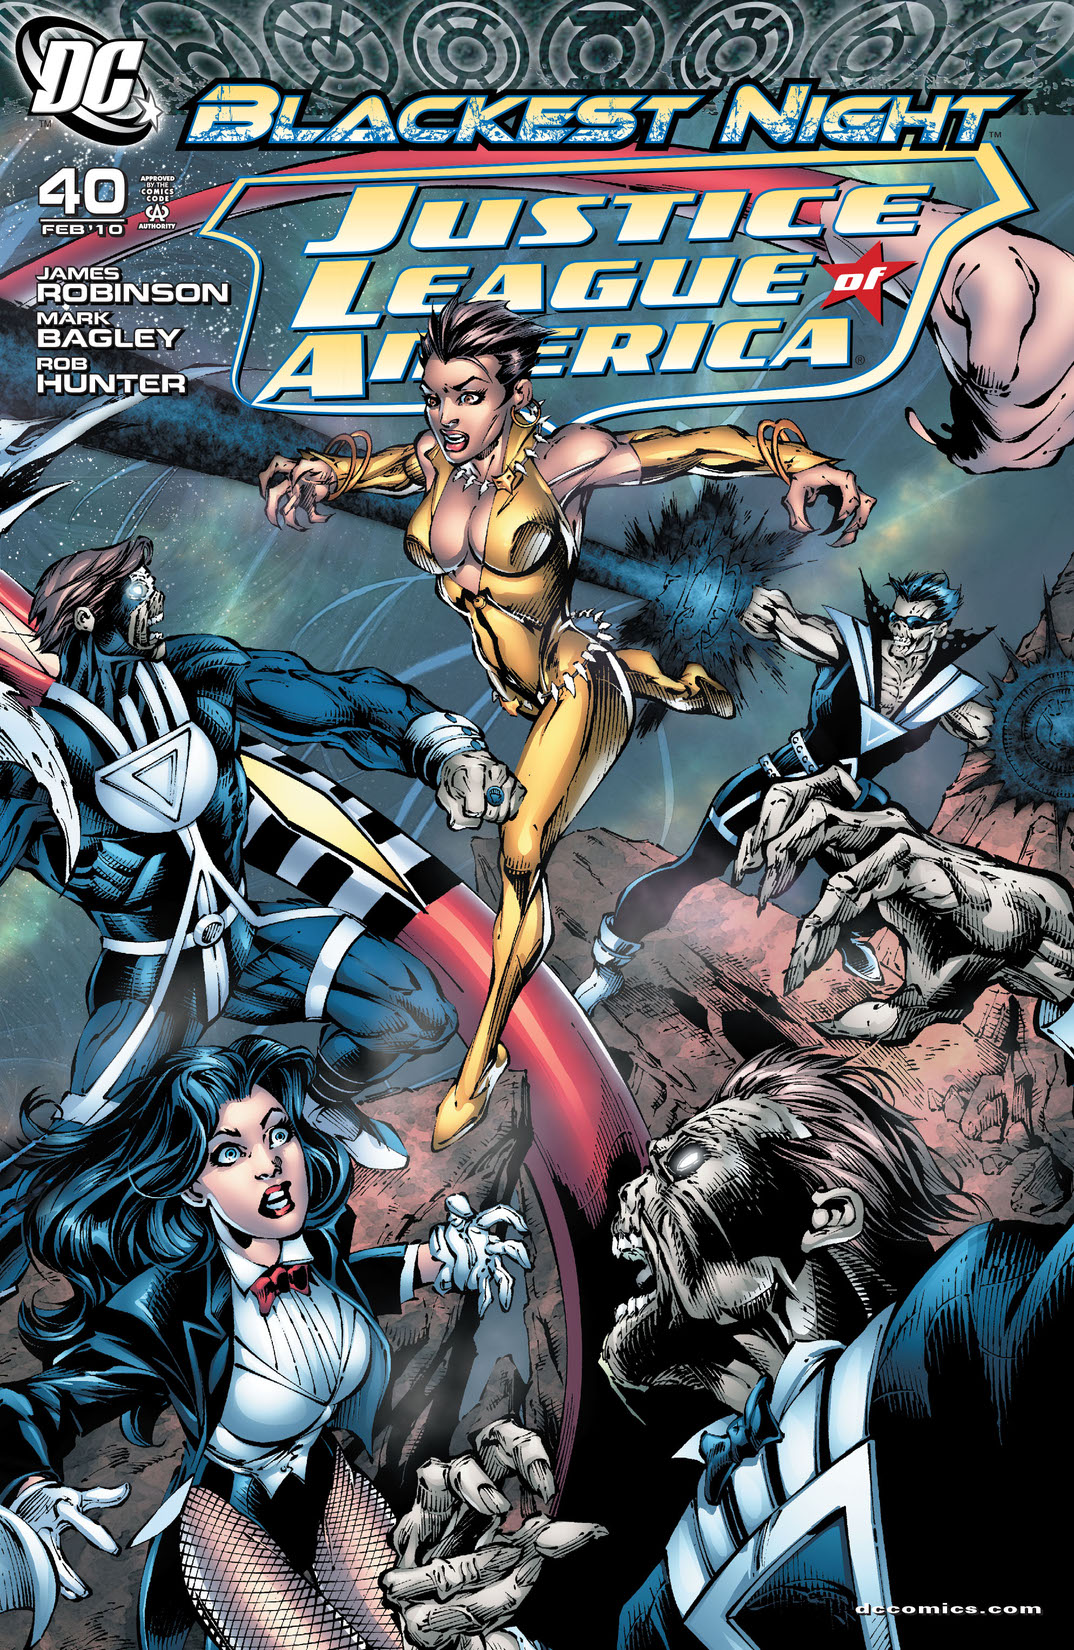 Justice League of America (2006-) #40 preview images